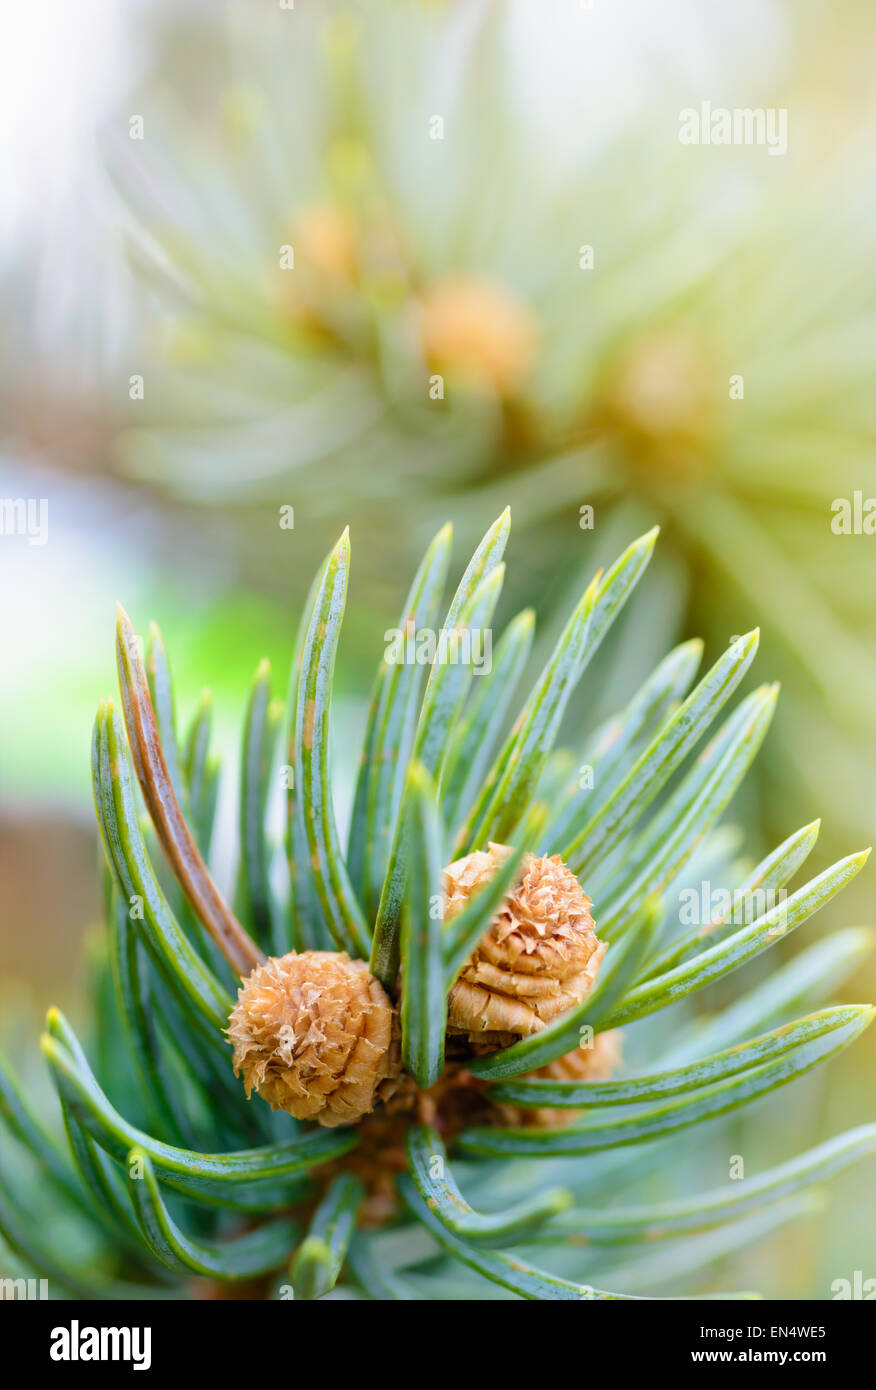 Plants and trees: fresh pine tree sprout, needles and small cones, in a sunlight, close-up shot, natural background Stock Photo